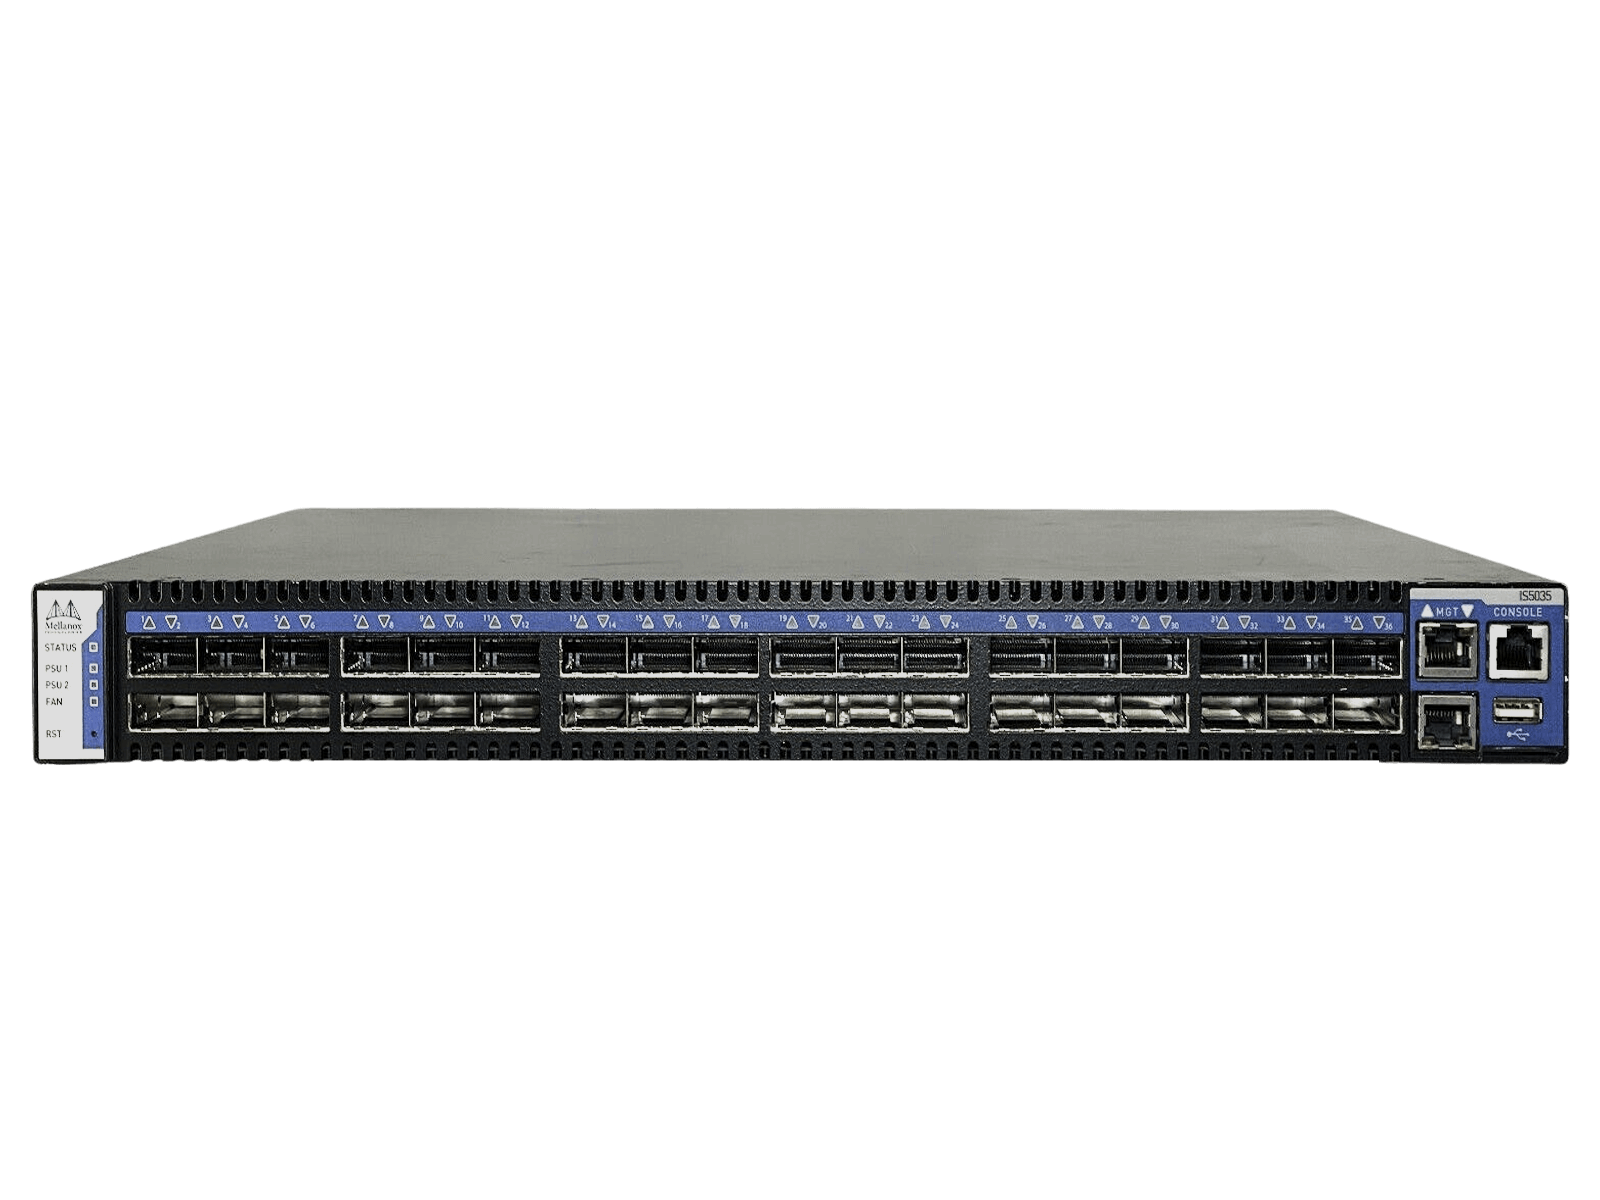 Mellanox IS5035 36-Port QDR 40Gbps InfiniBand Switch 2x PSU Ears Back-to-Front MIS5035Q-1BFC.